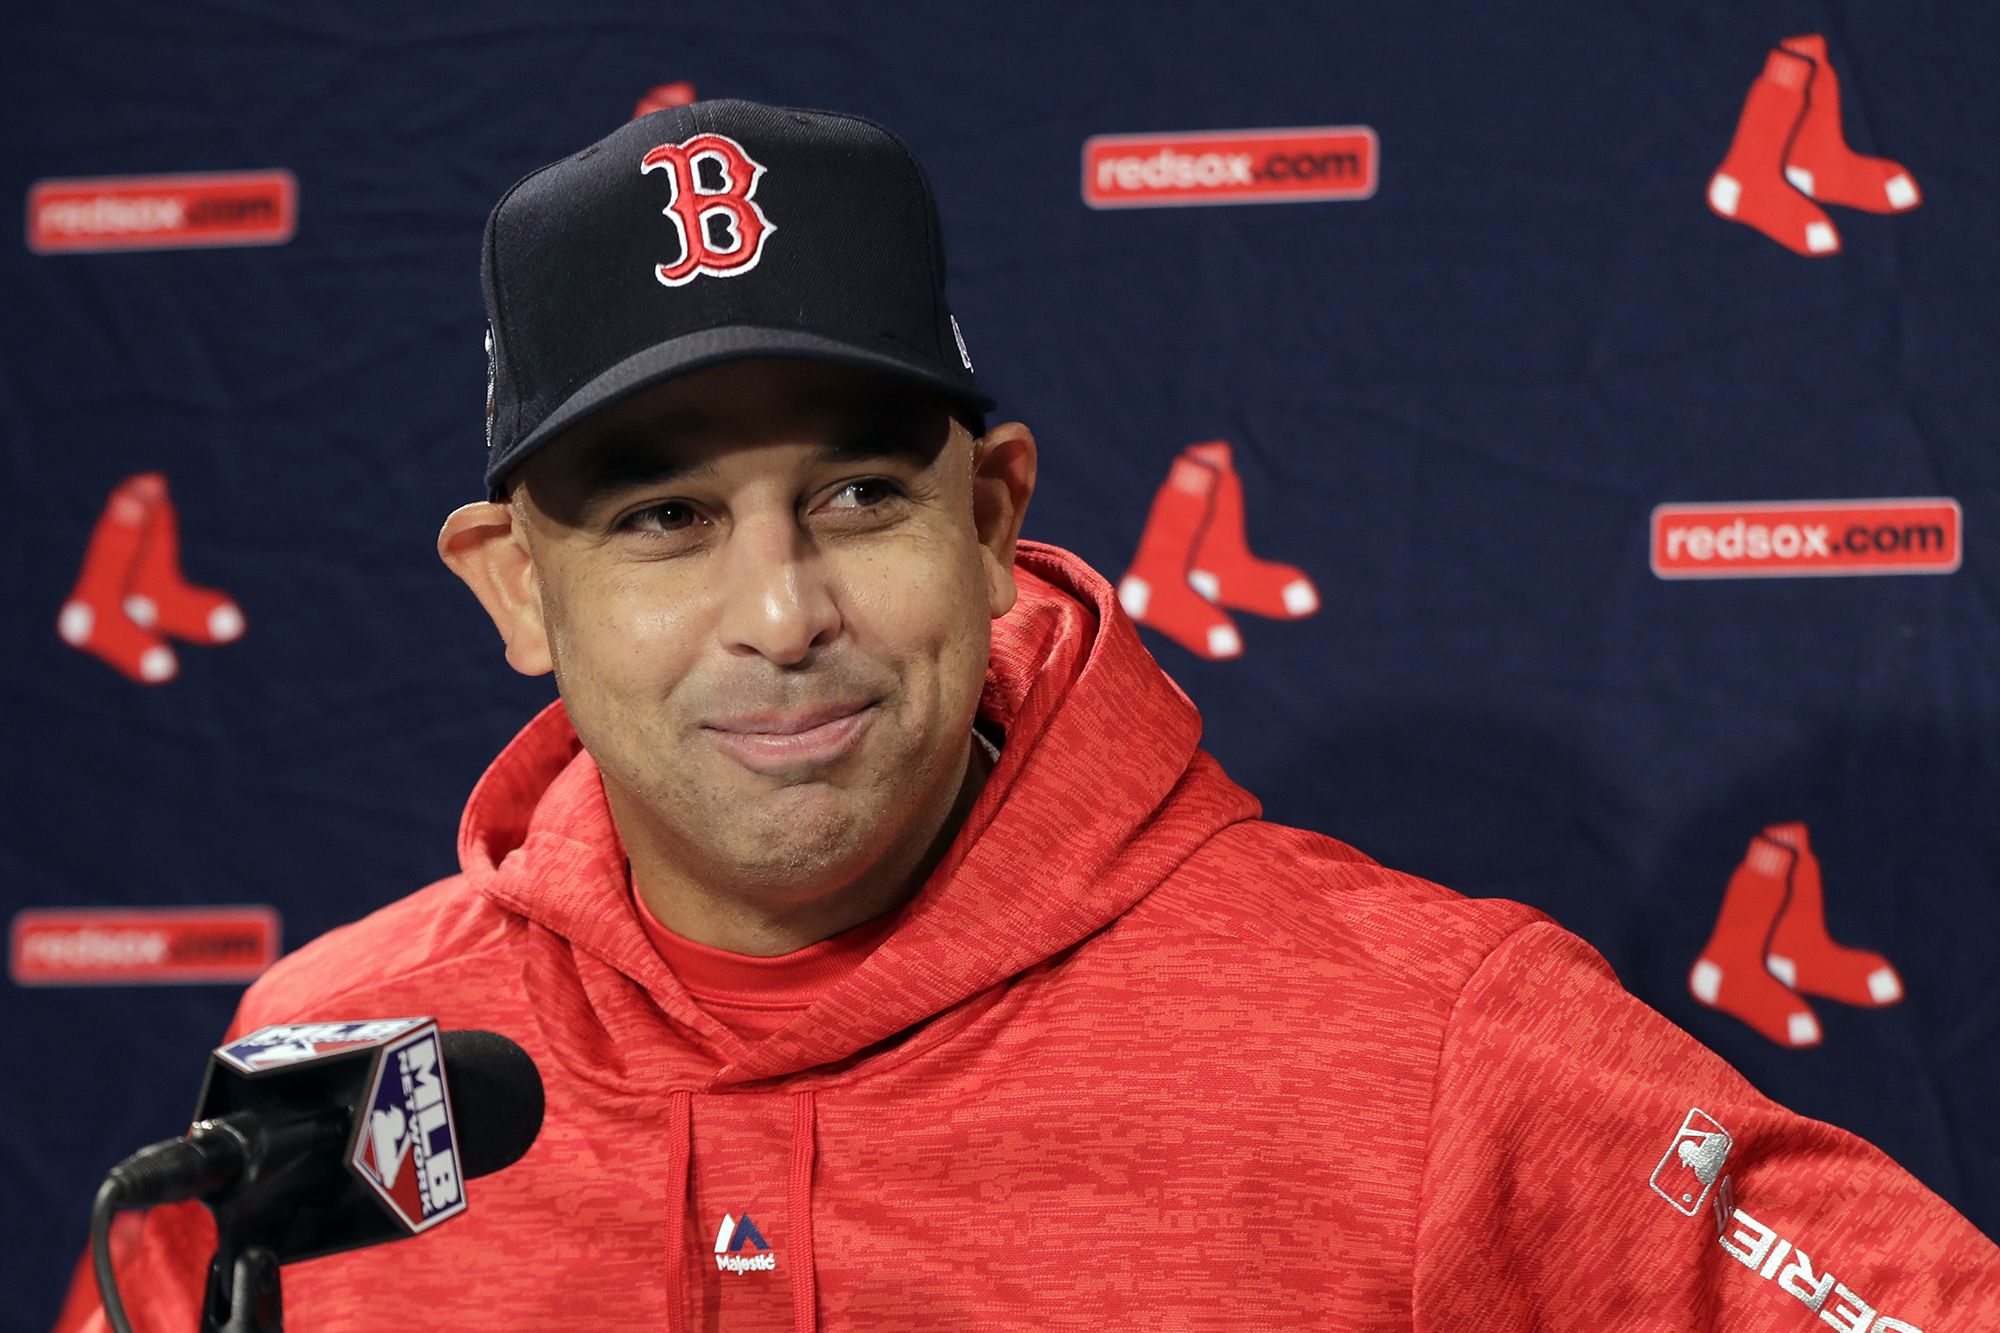 Alex Cora made Red Sox pitcher emotional after apology for role in cheating  scandal